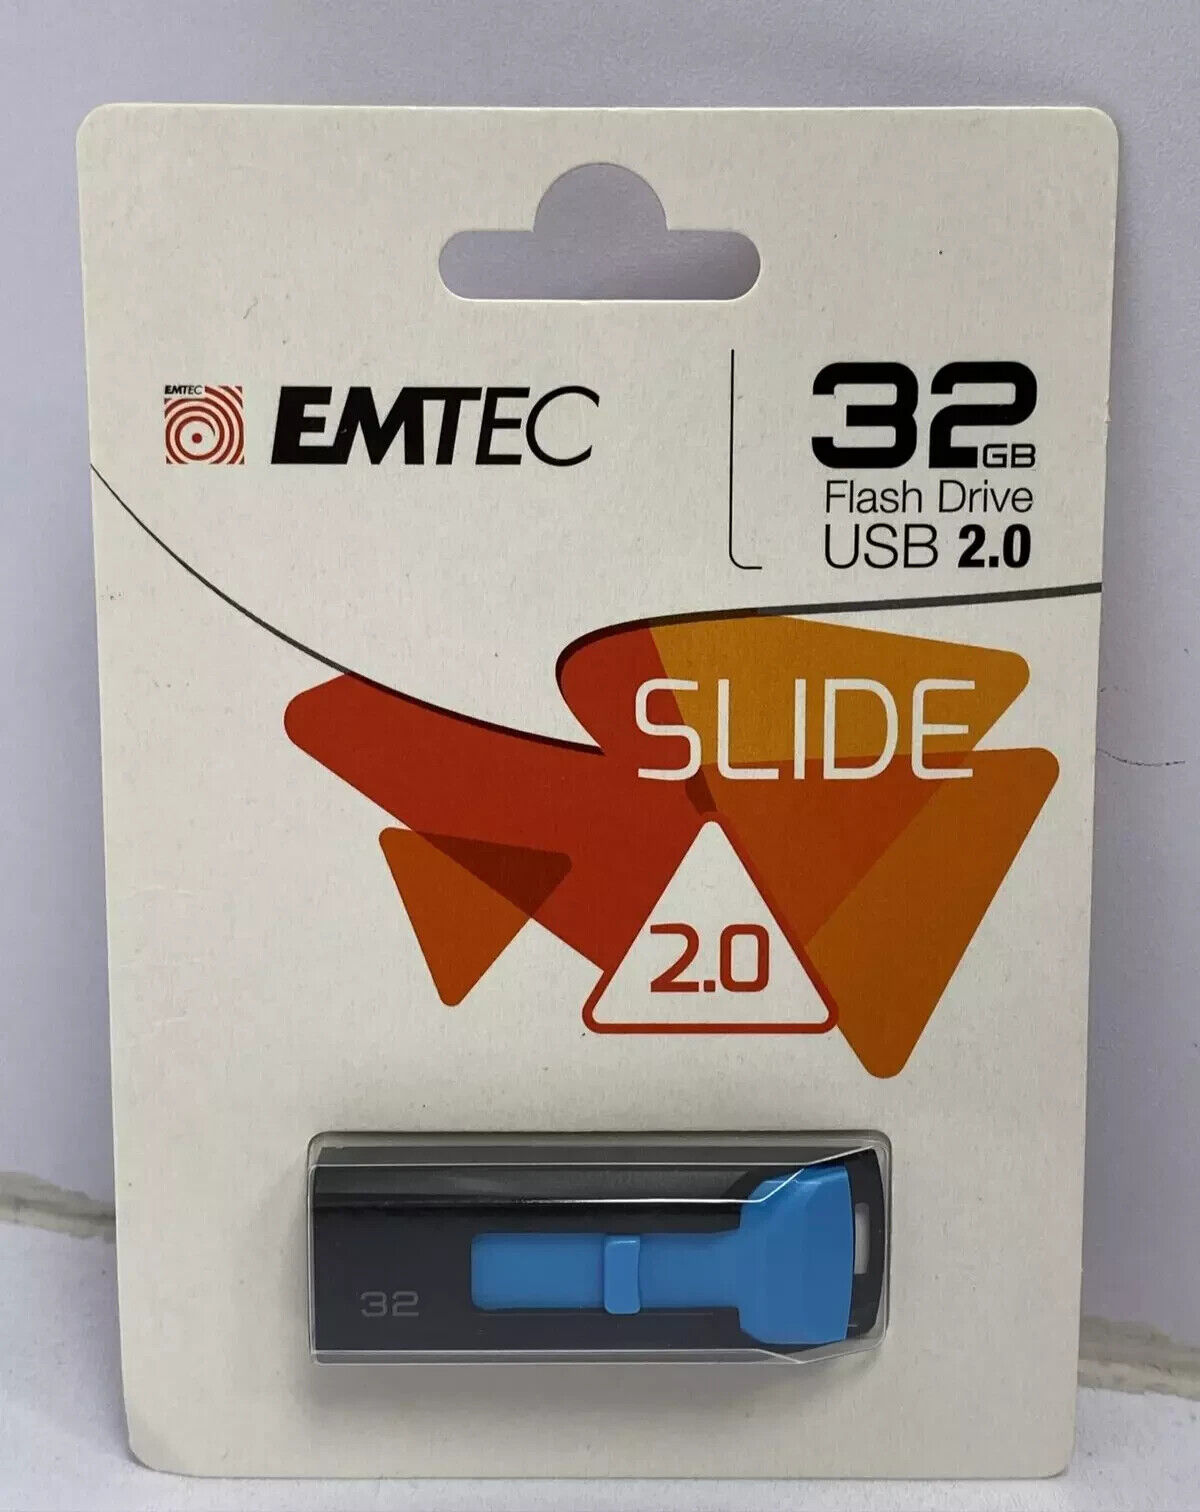 EMTEC Slide 32GB USB 2.0 Flash Drive brand new in package USA made